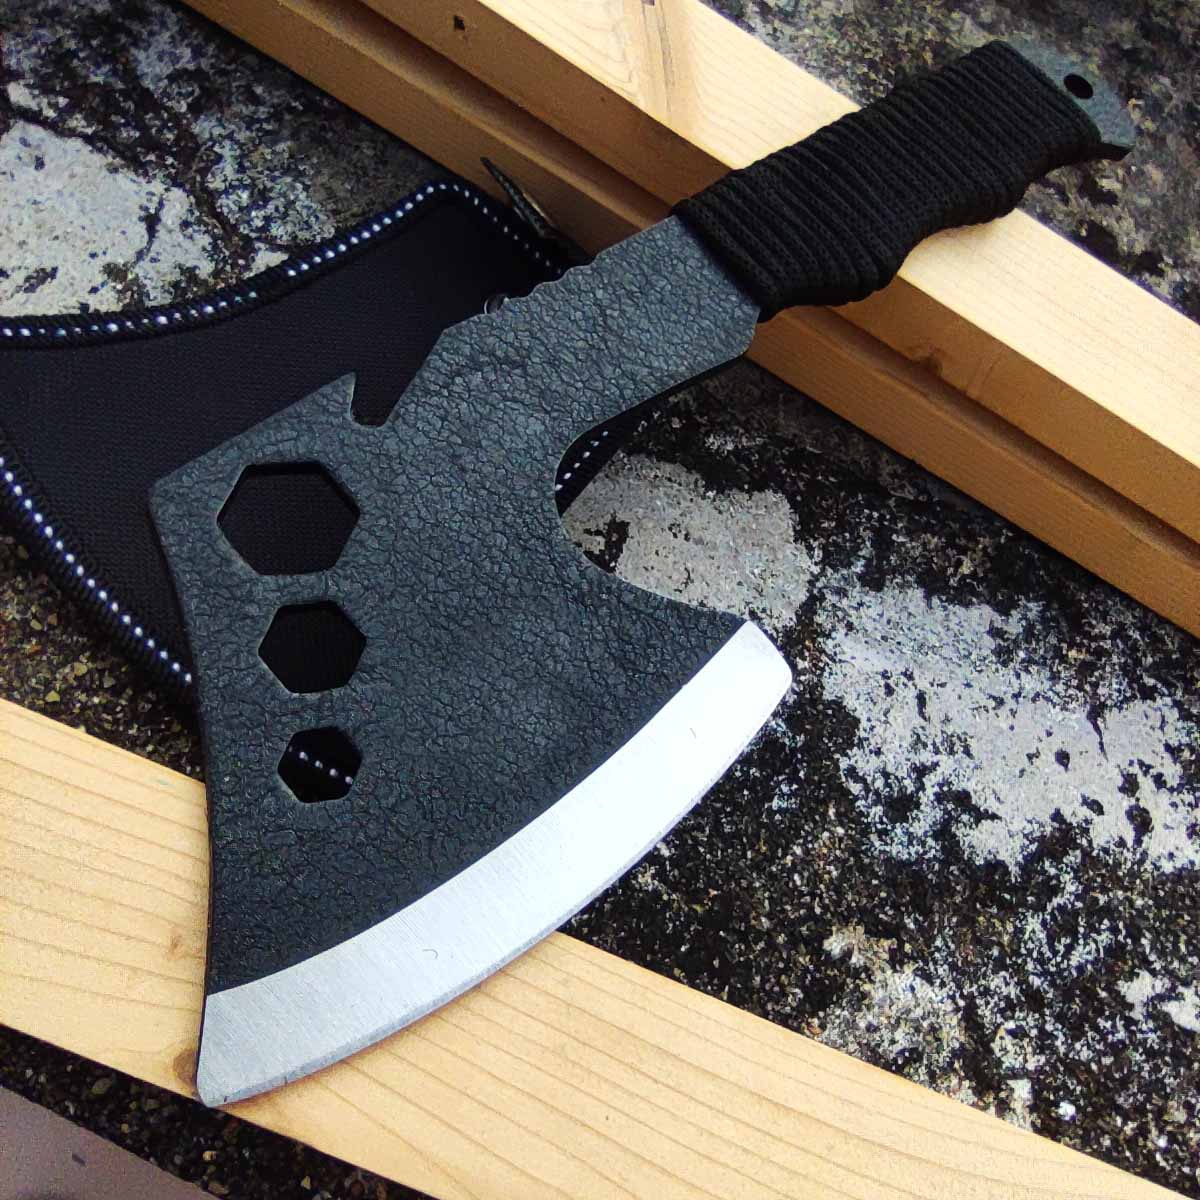 11 SURVIVAL TACTICAL TOMAHAWK THROWING AXE BATTLE Hatchet Hunting FULL  TANG